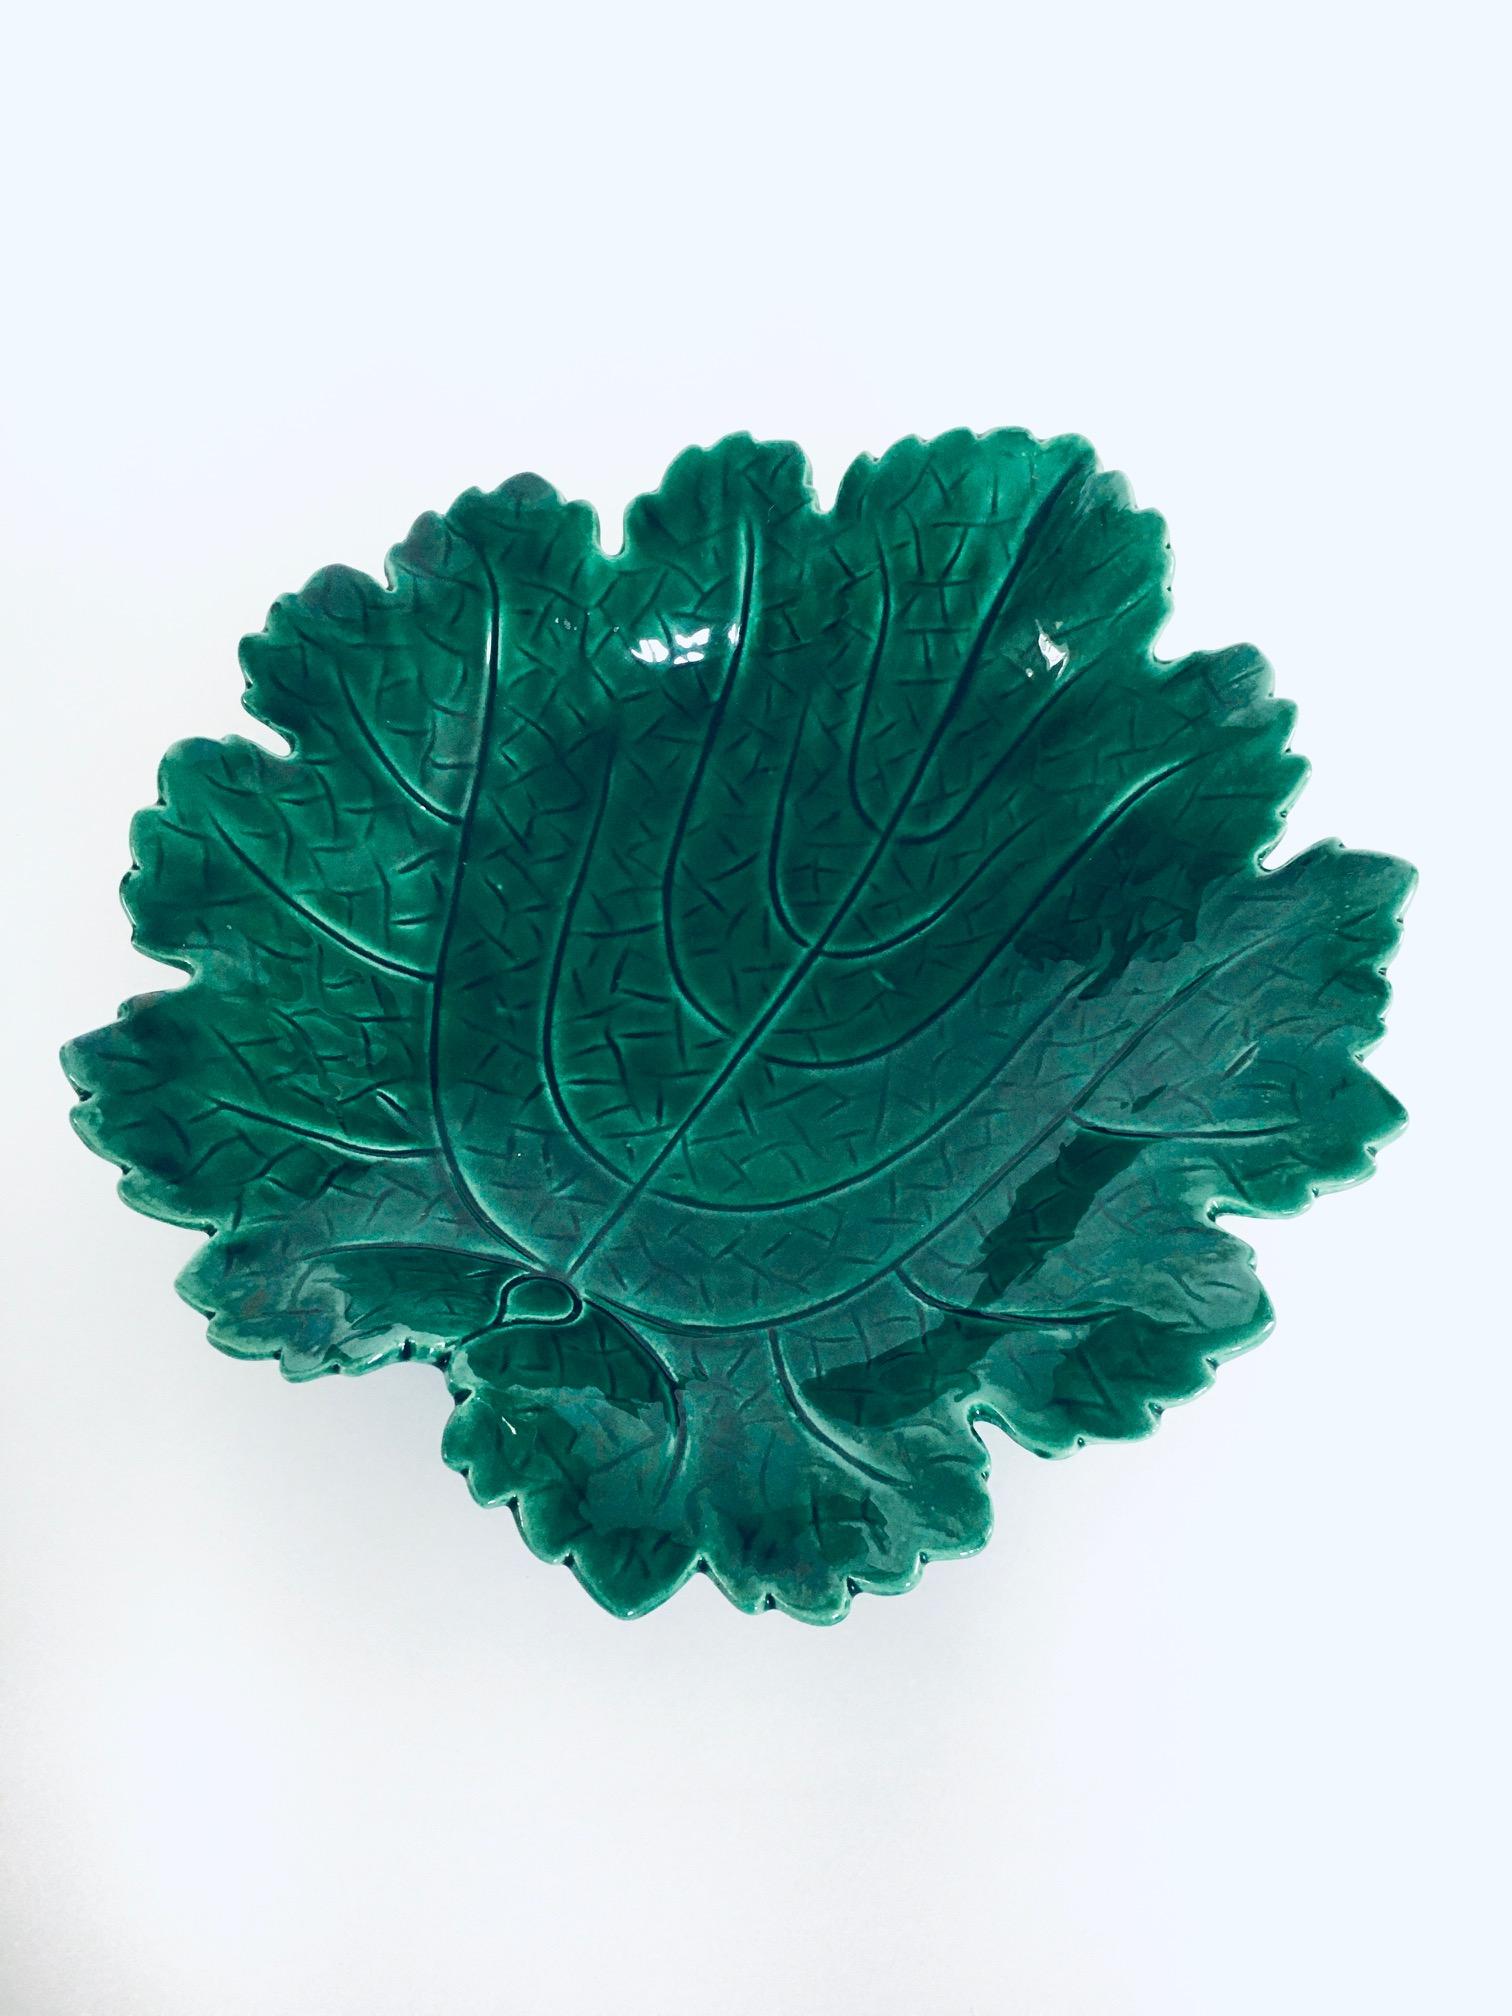 French Vintage Studio Pottery Leaf Bowl by Albert Ferlay, Vallauris France 1960's For Sale